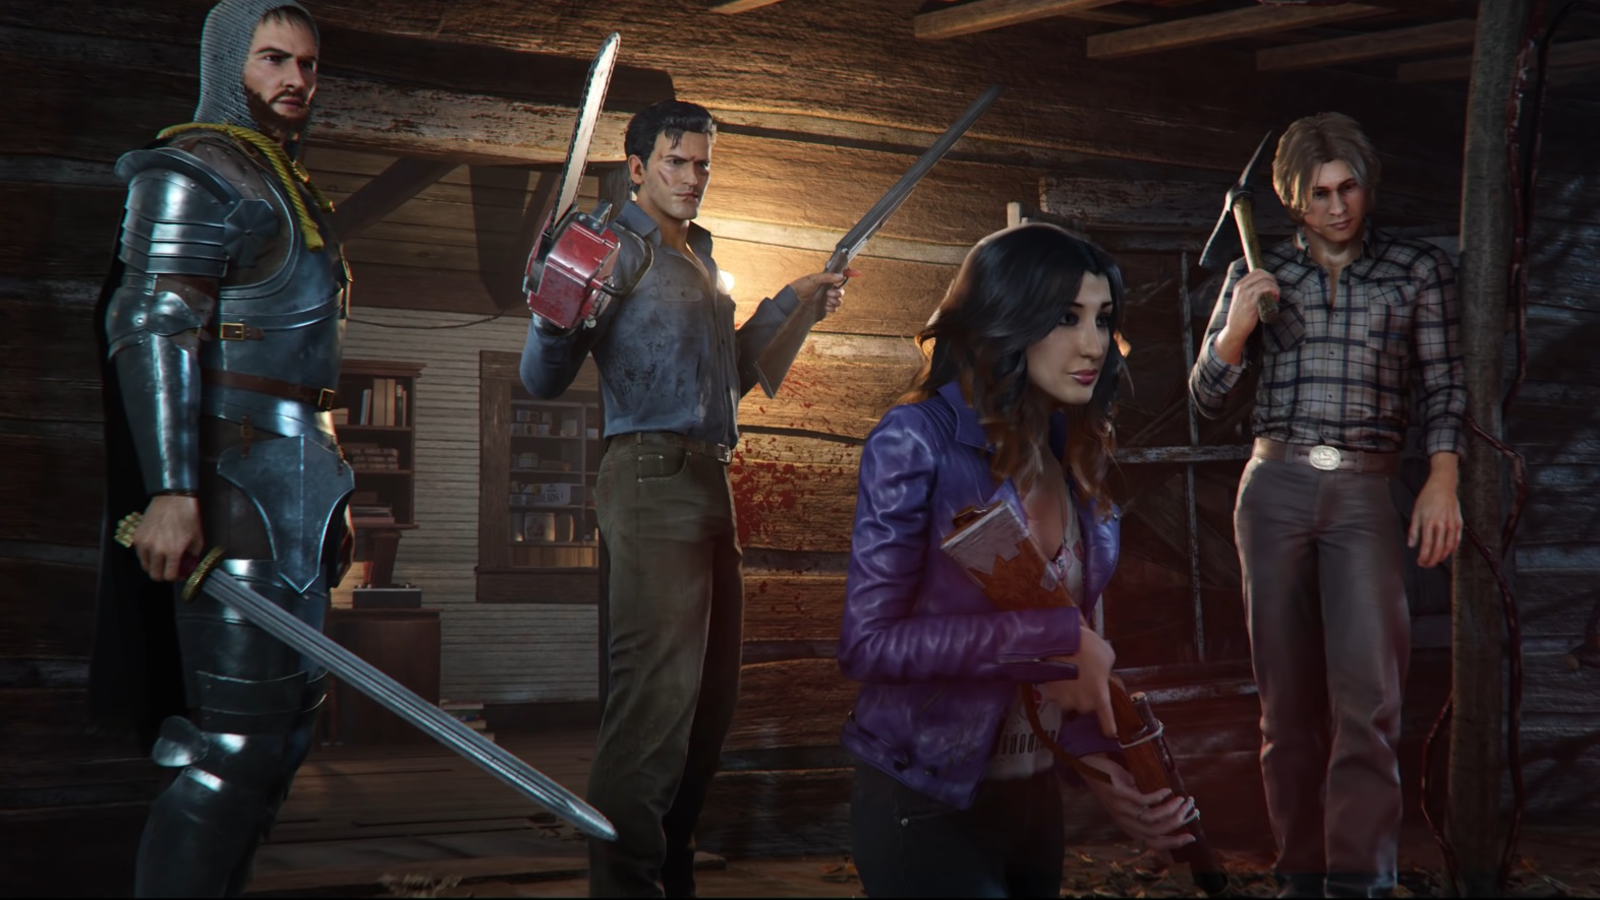 Evil Dead: The Game – Launch Trailer